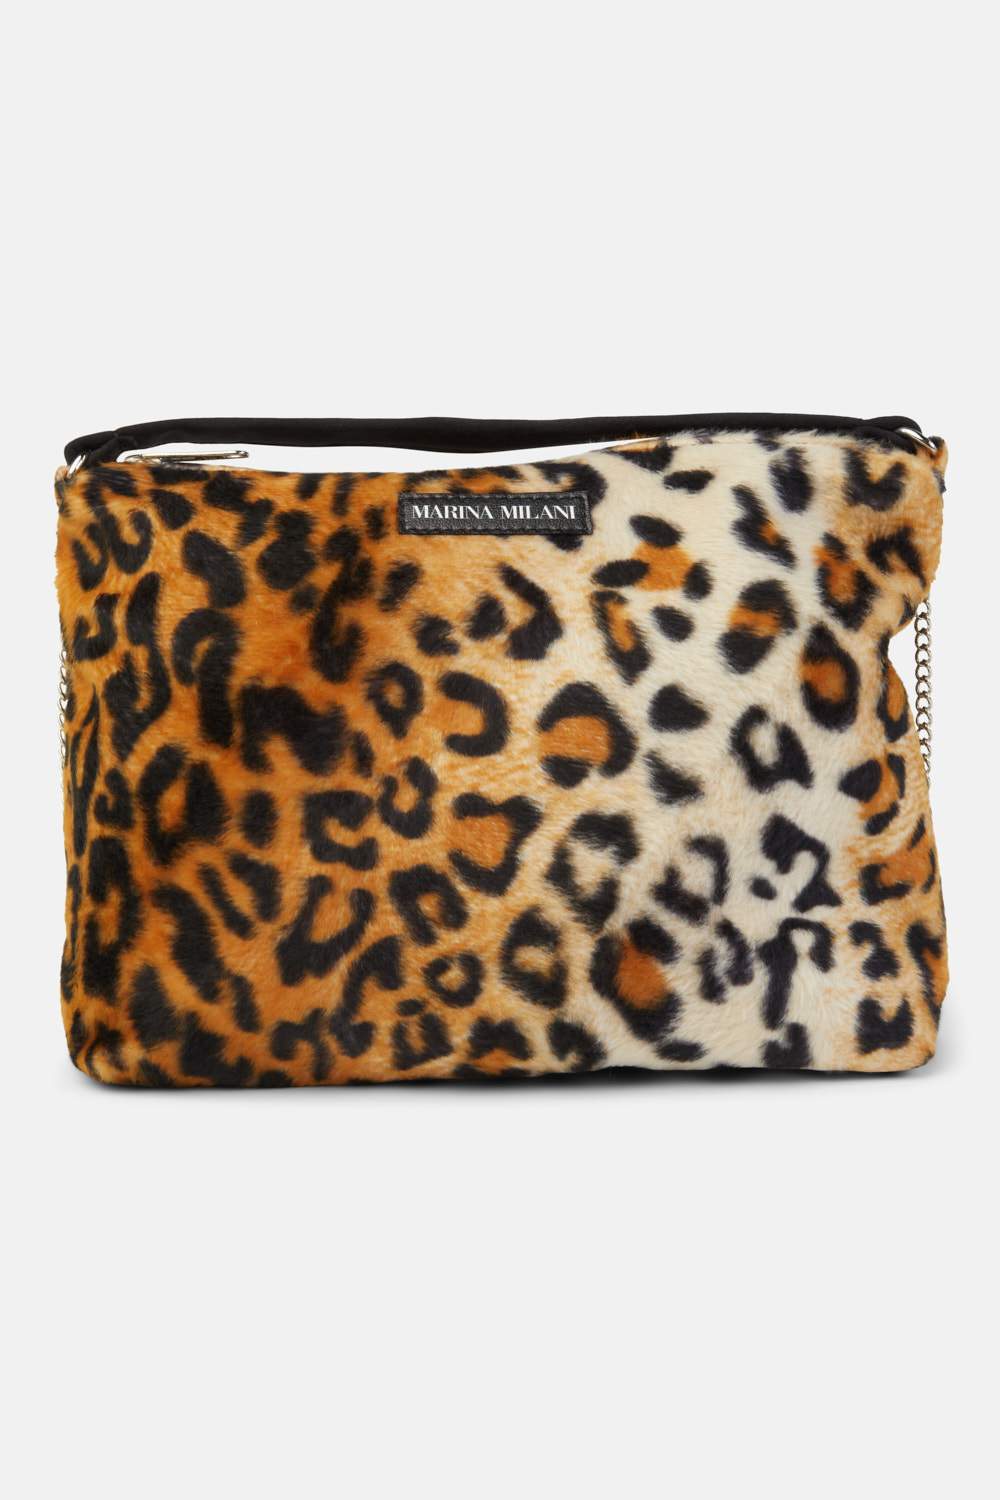 DKNY Women's Clutch Bags - Bags | Stylicy India